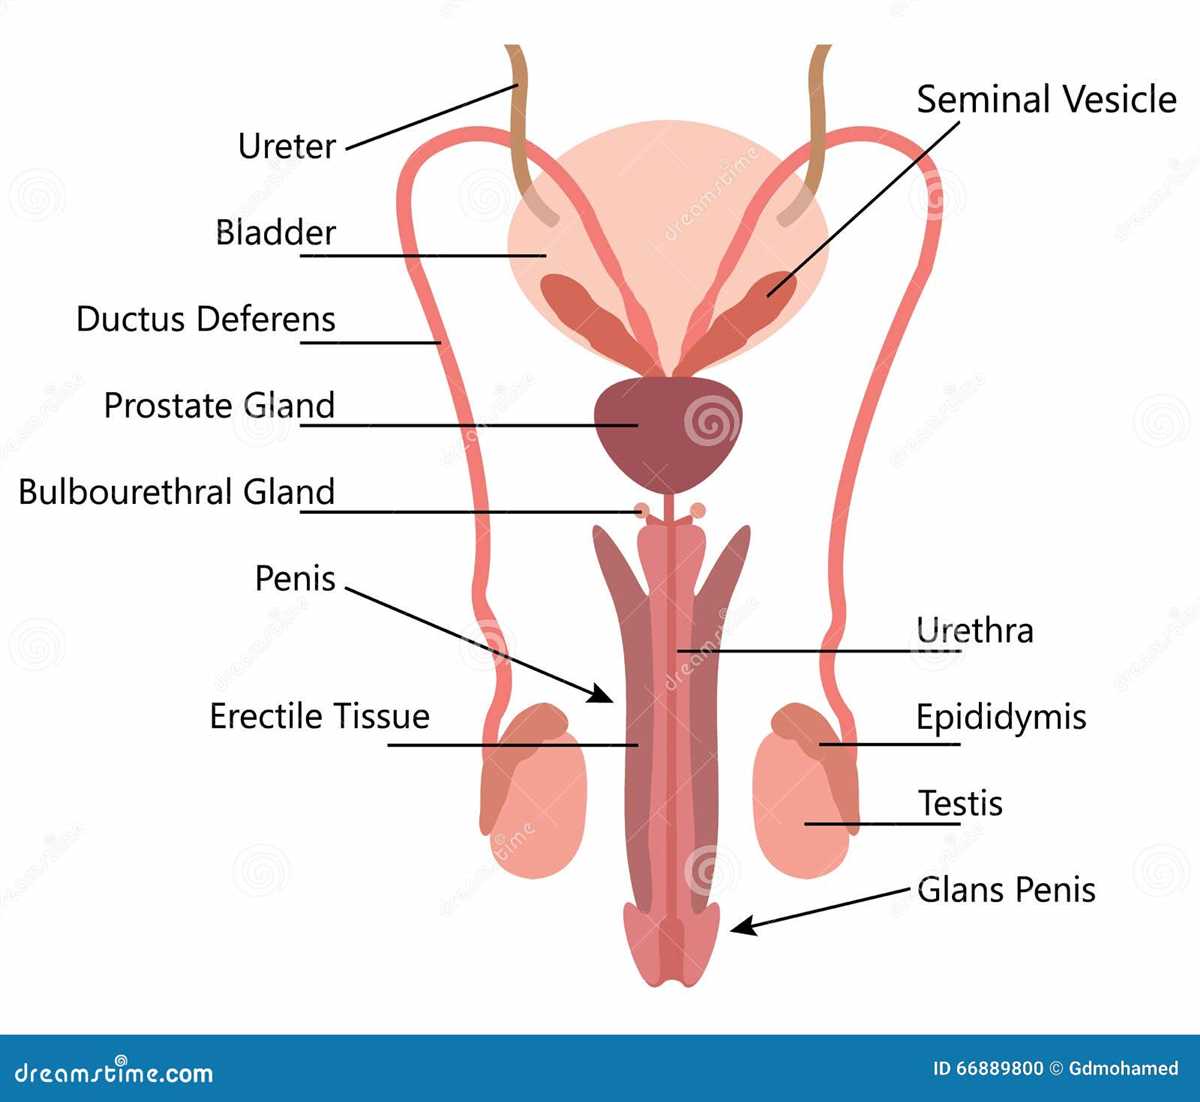 Prostate Gland: The Contributor of Seminal Fluid